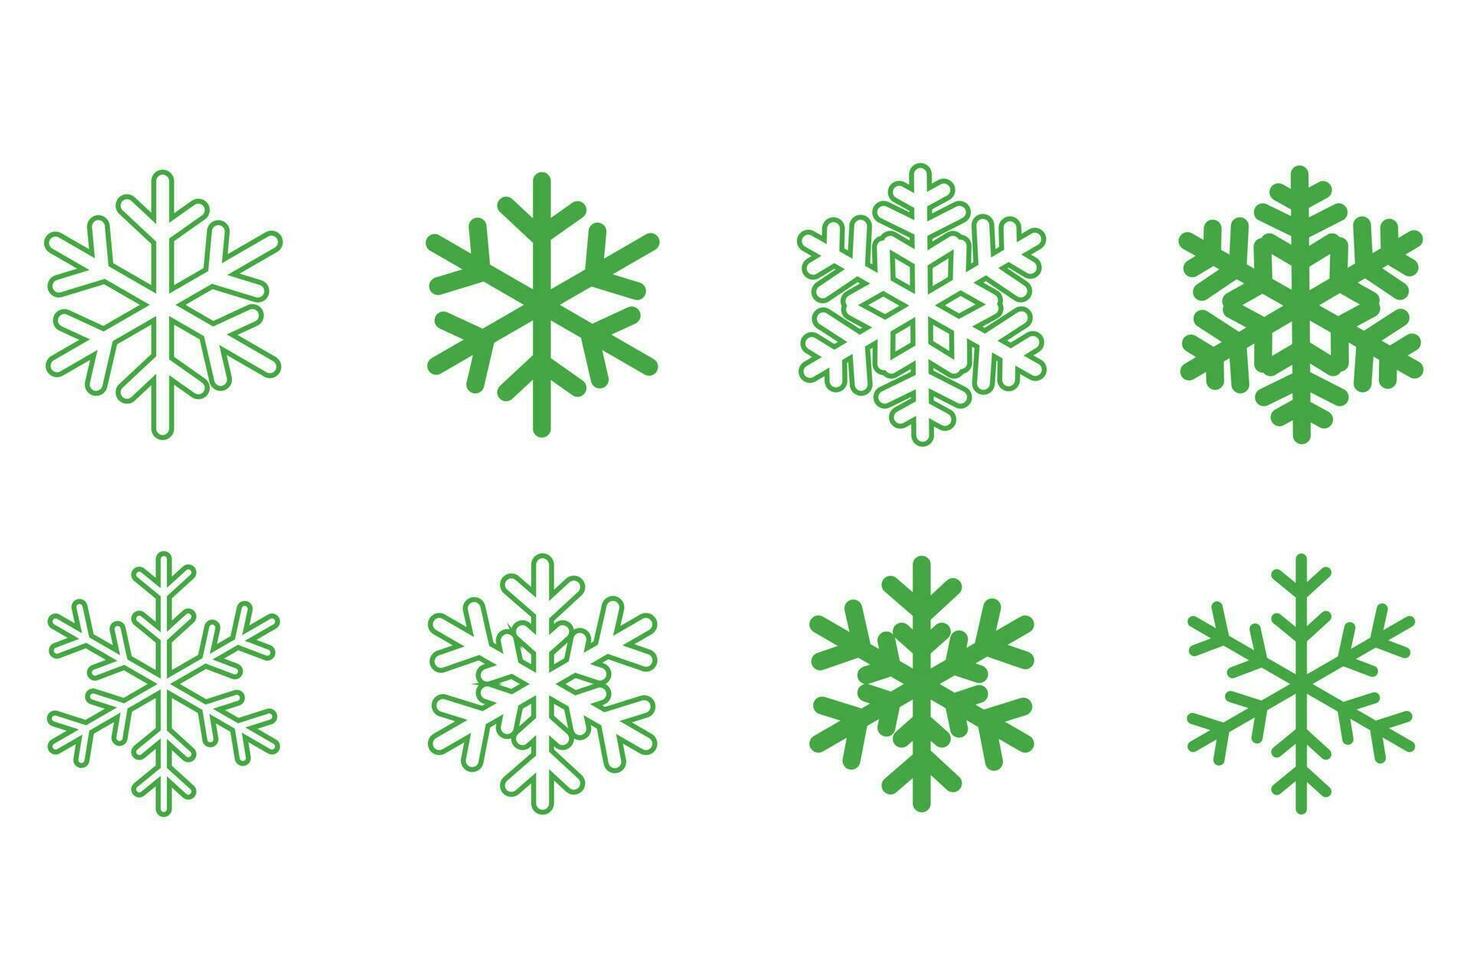 Snowflake vector icon illustration design template. Collection of symbols of green colored snowflakes that can be used for designs of winter, snow, christmas etc